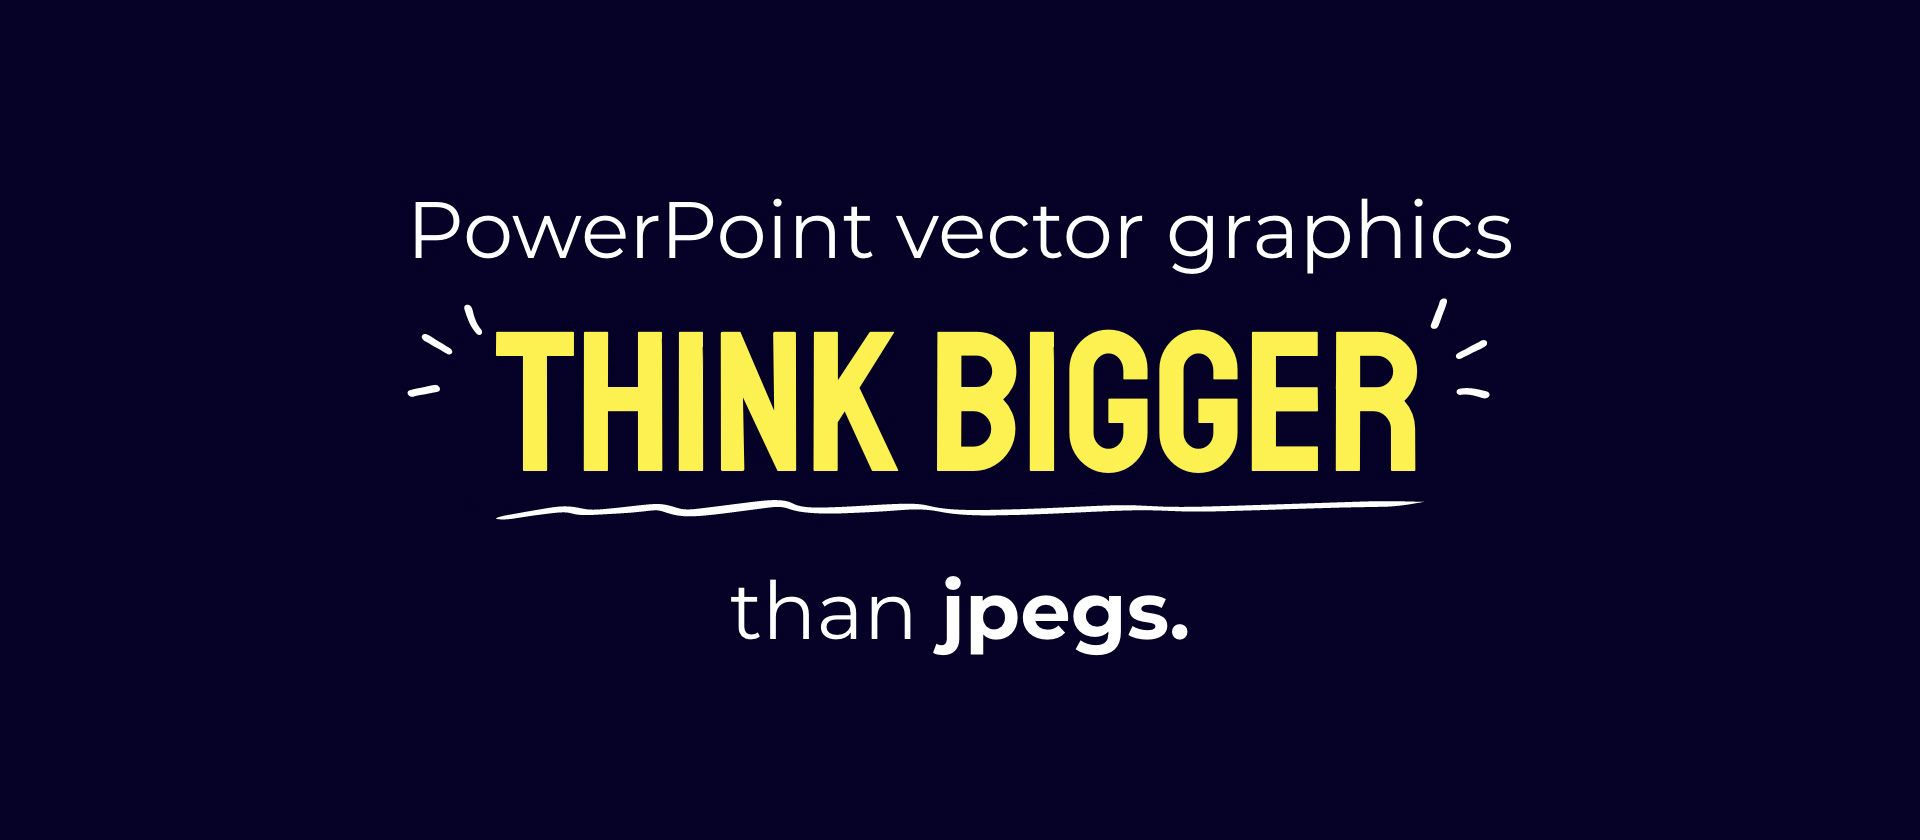 PowerPoint vector graphics: think bigger than jpegs.